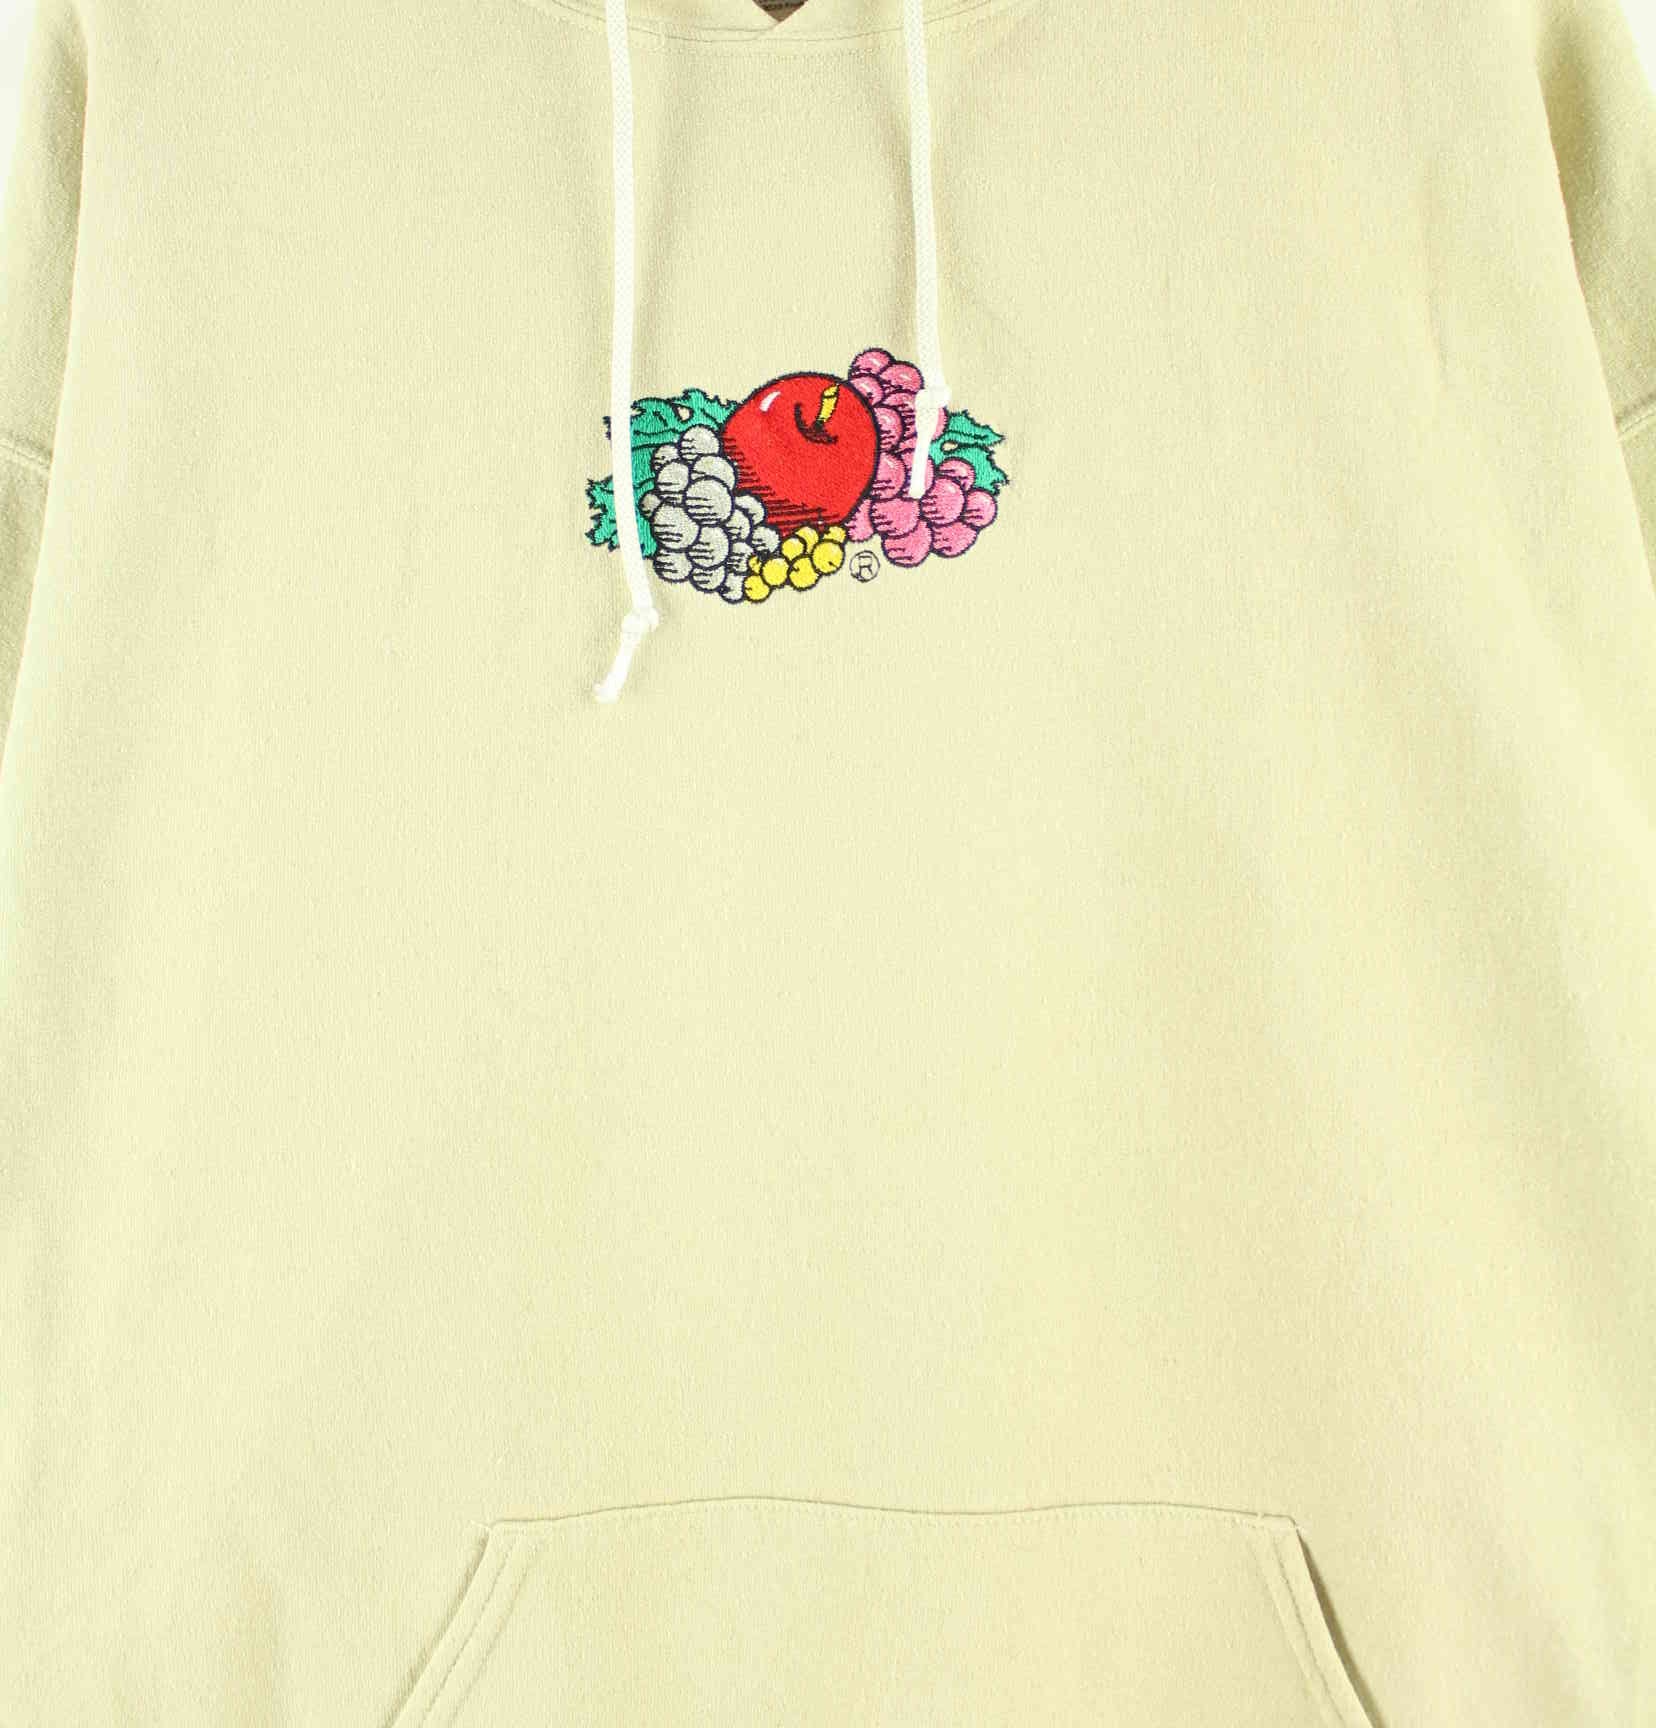 Fruit of the Loom Embroidered Hoodie Beige L (detail image 1)